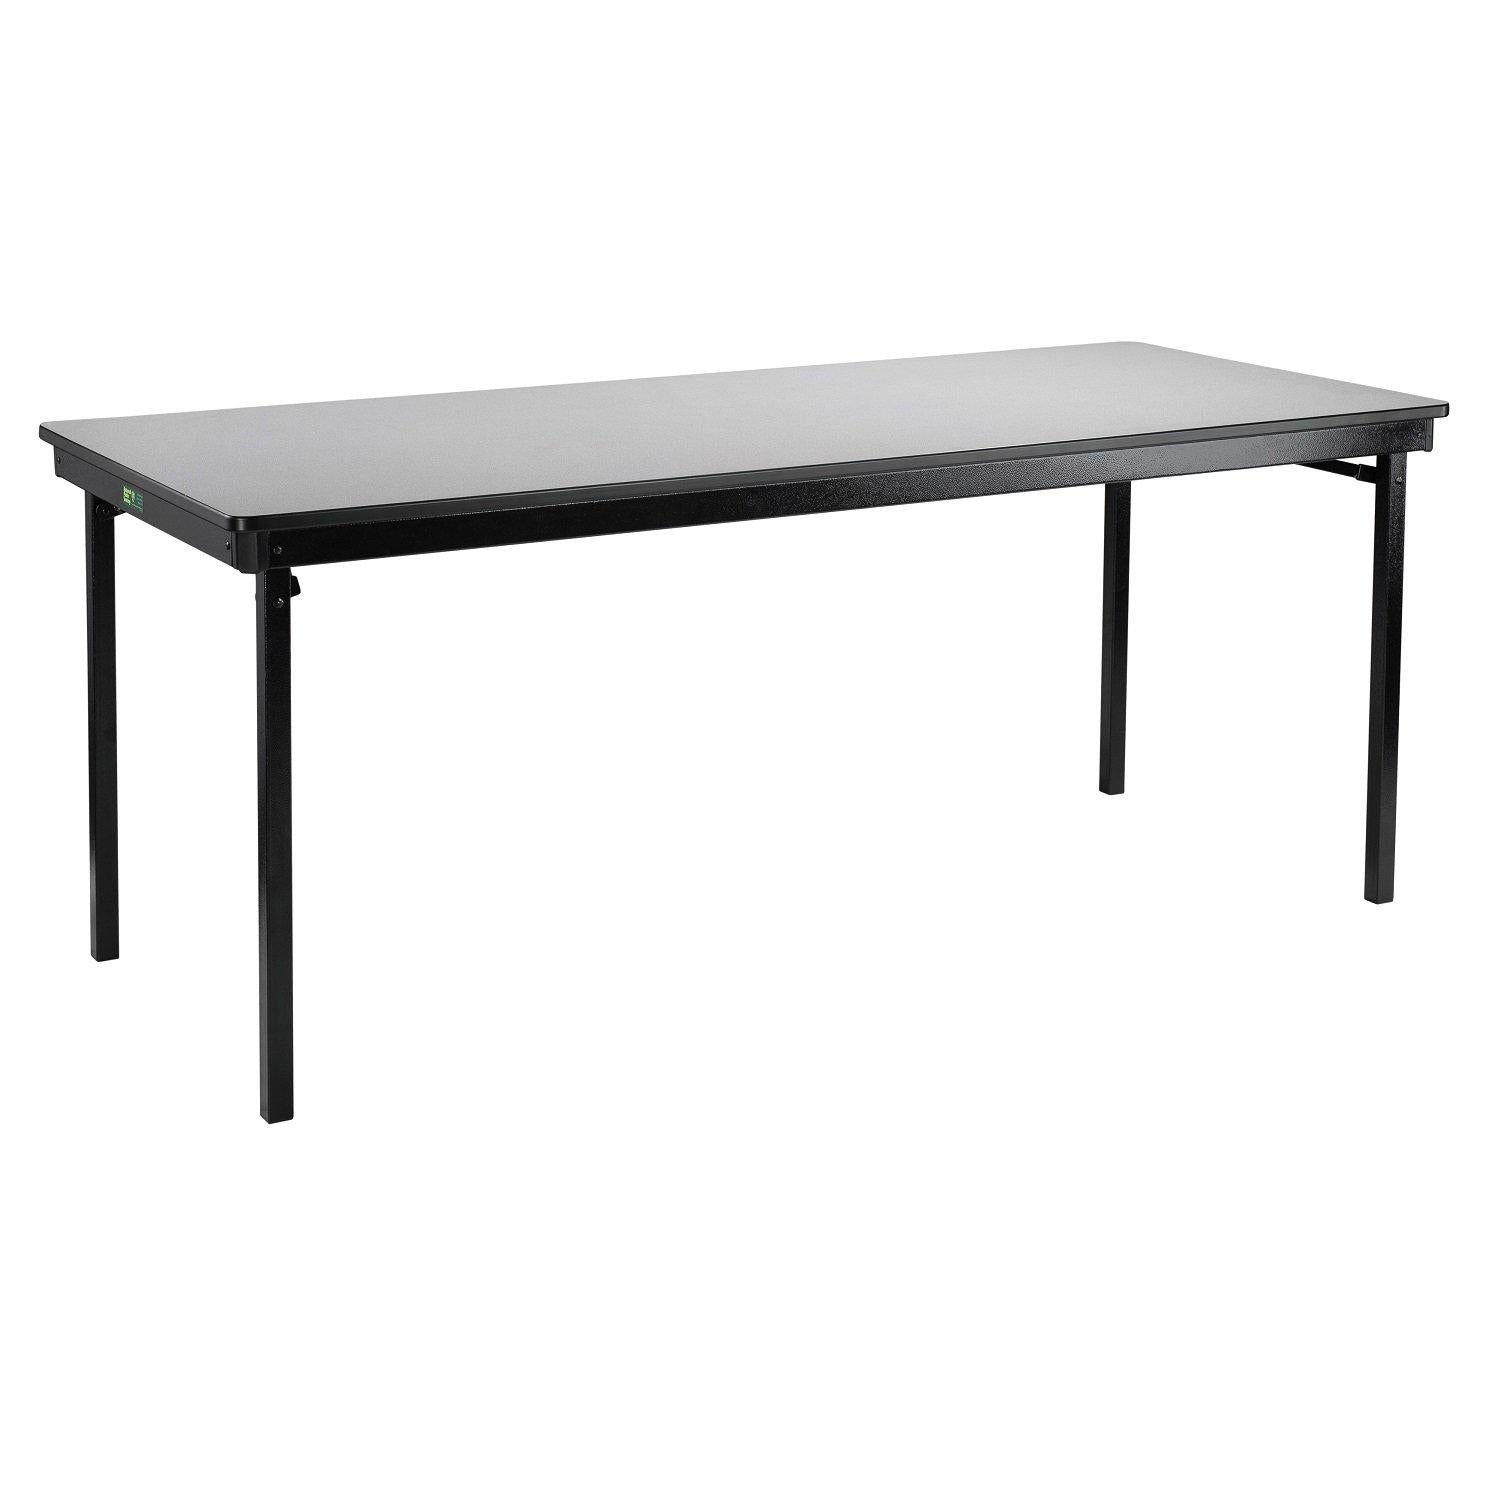 Max Seating Folding Table, 30" x 96", Premium Plywood Core, High Pressure Laminate Top with PVC Edge Banding